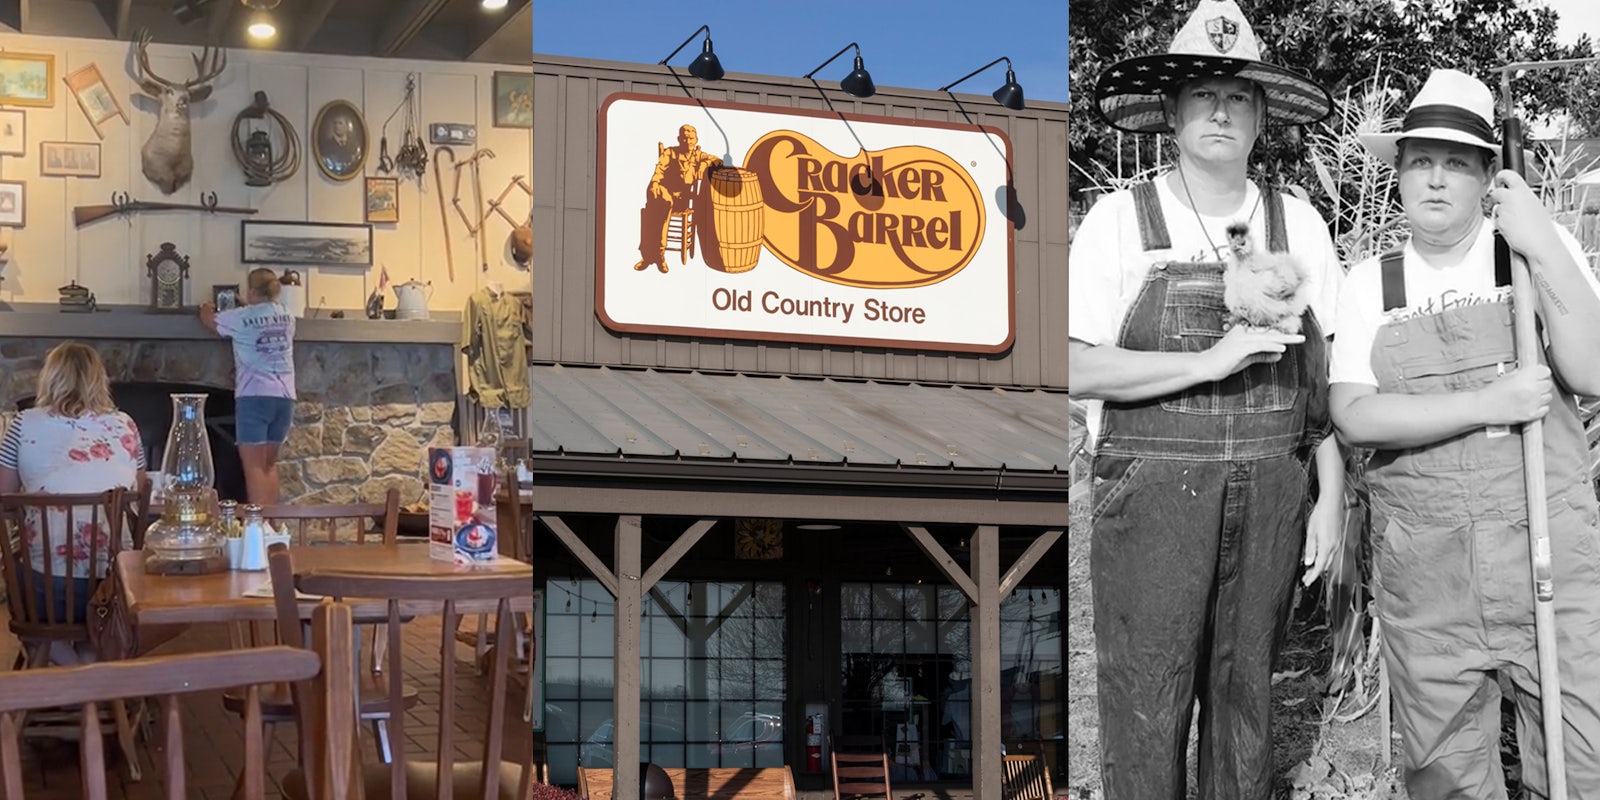 woman adding framed photo to Cracker Barrel interior wall (l) Cracker Barrel building with sign (c) Cracker barrel customers in black and white photo (r)